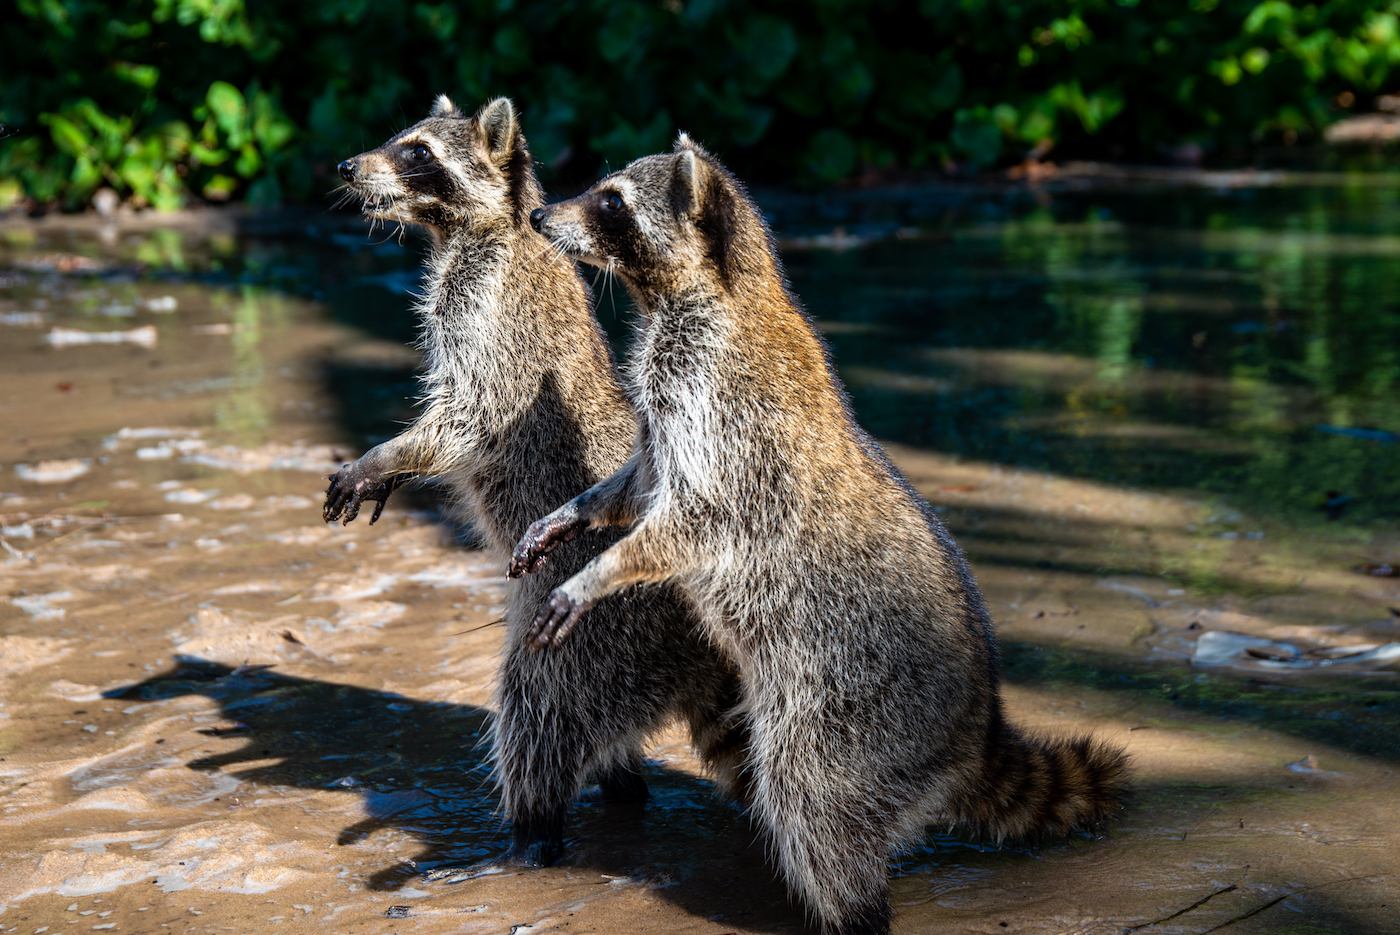 two raccoons stand on their hind legs on a sandy shore.